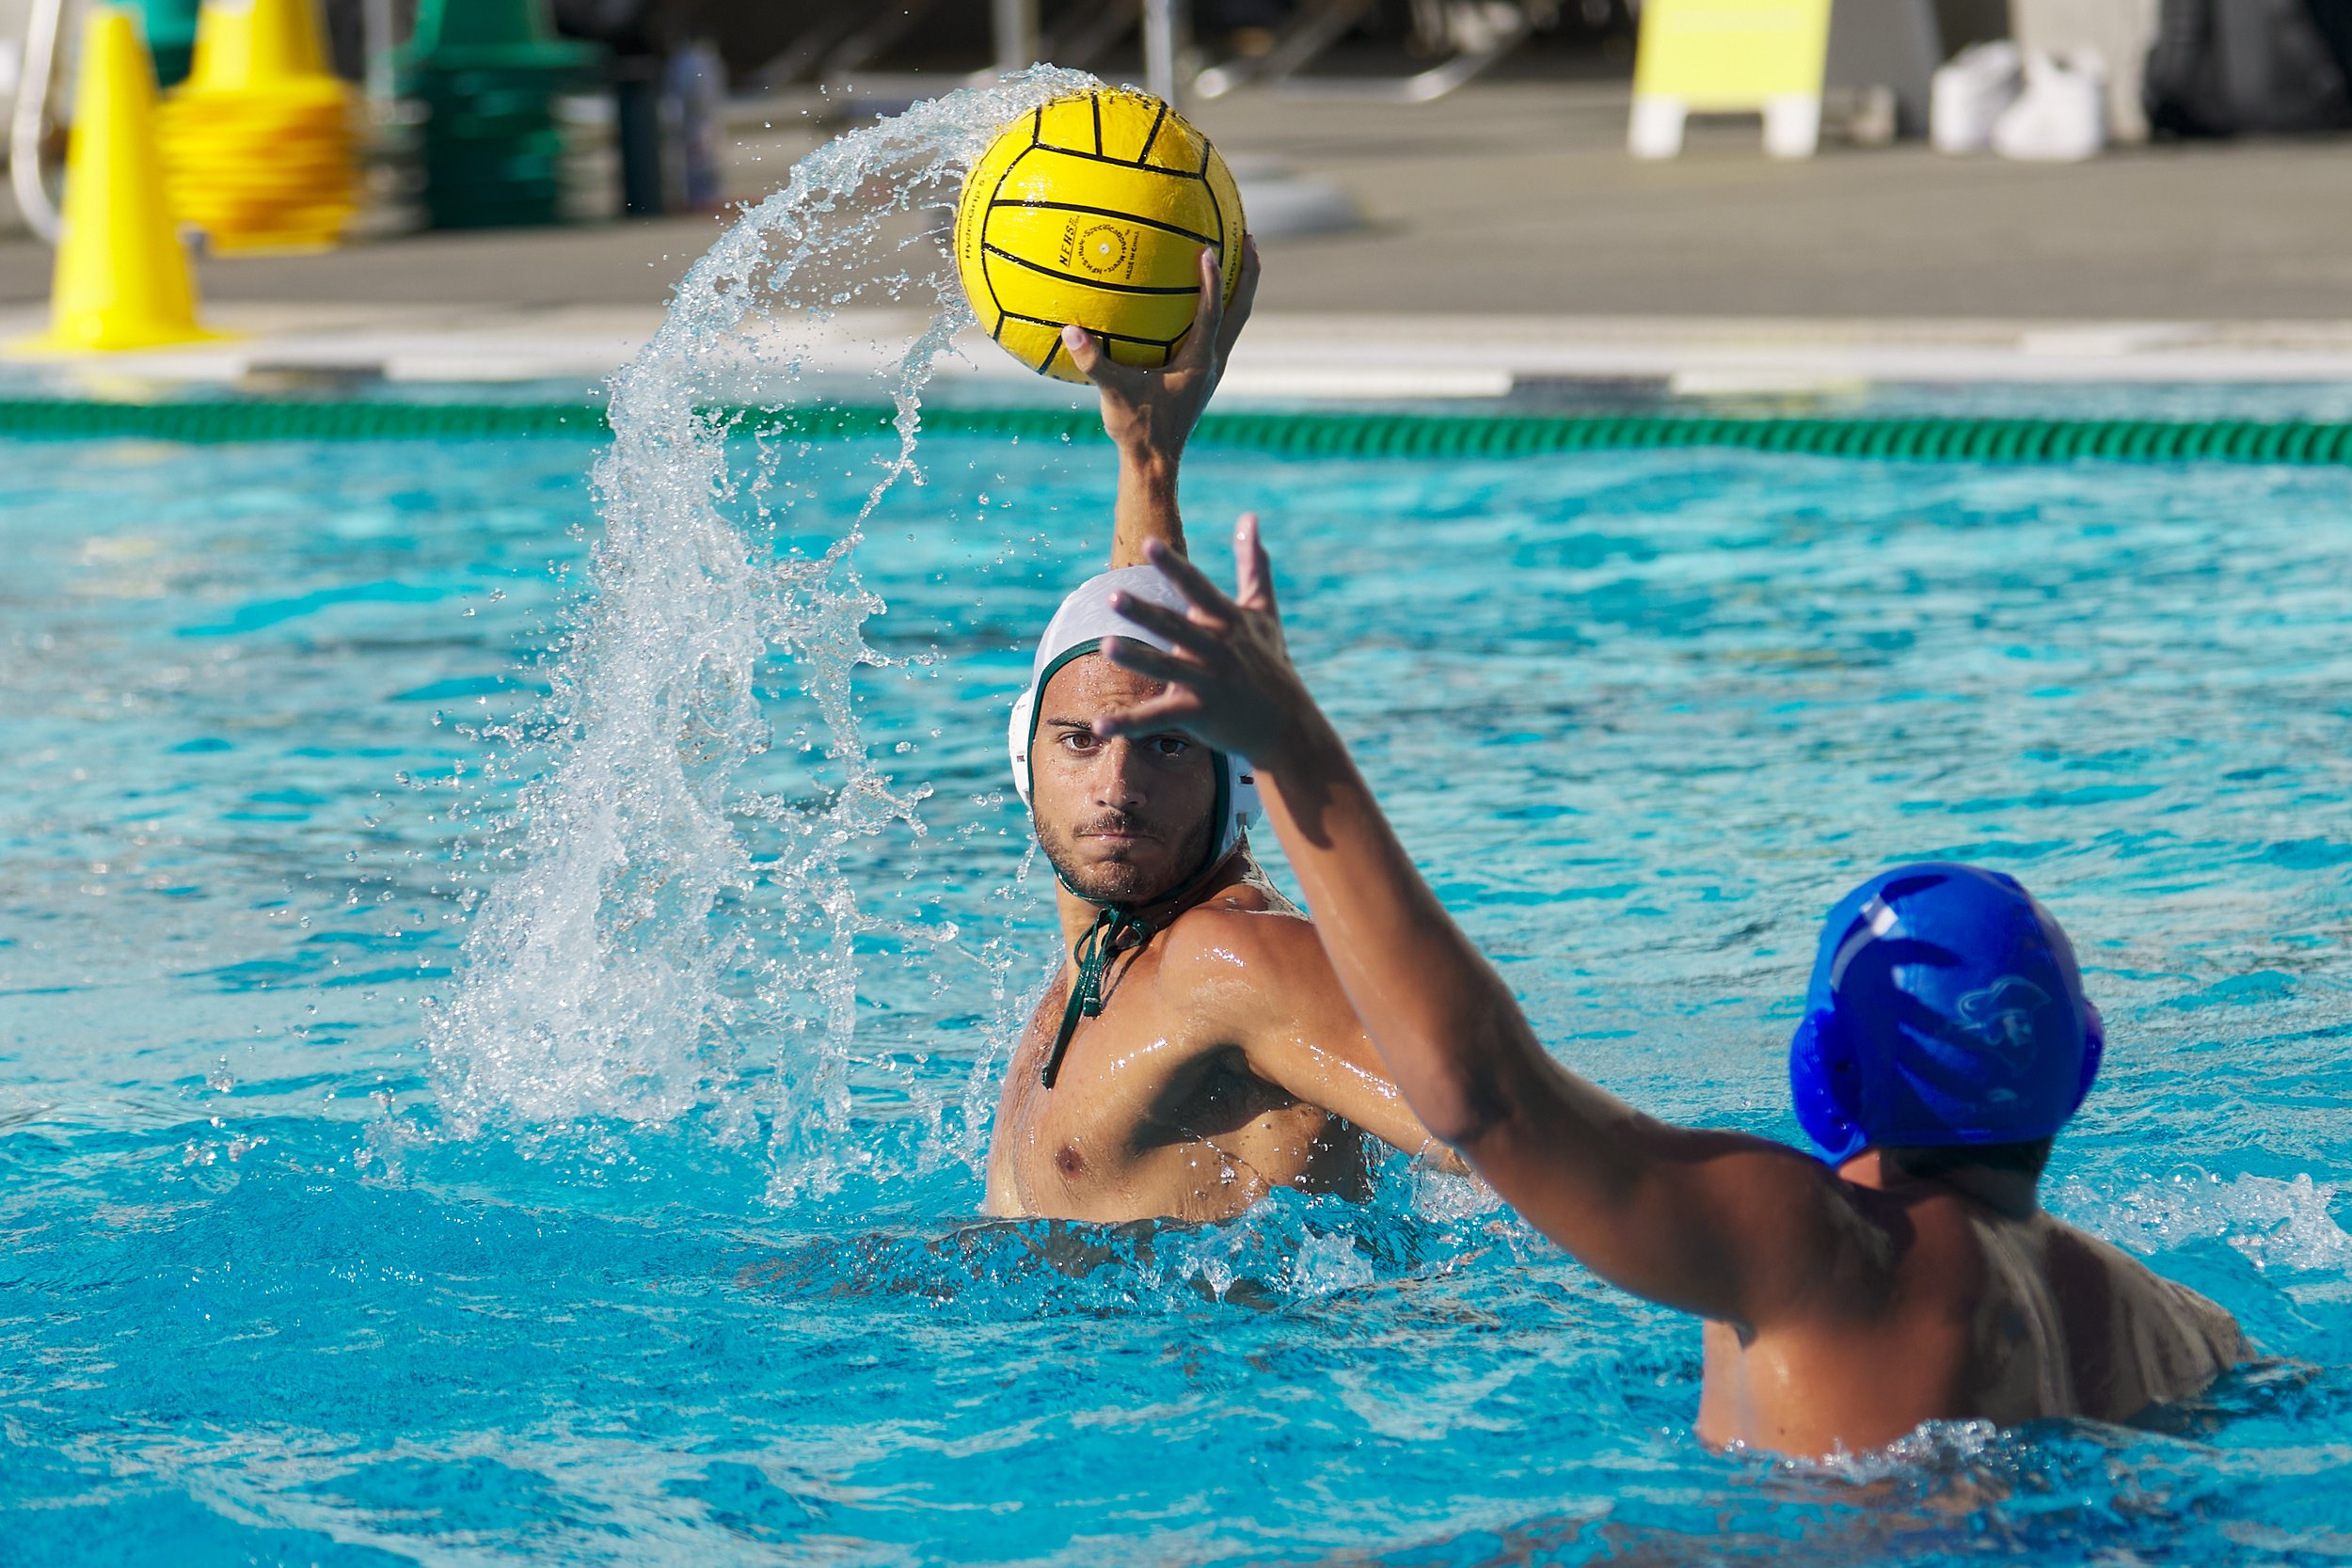  Los Angeles Valley College Monarchs' Sam Krboyan during the men's water polo match against the Santa Monica Corsairs on Wednesday, Sept. 28, 2022, at the SMC Aquatics Center in Santa Monica, Calif. The Corsairs lost 23-4. (Nicholas McCall | The Cors